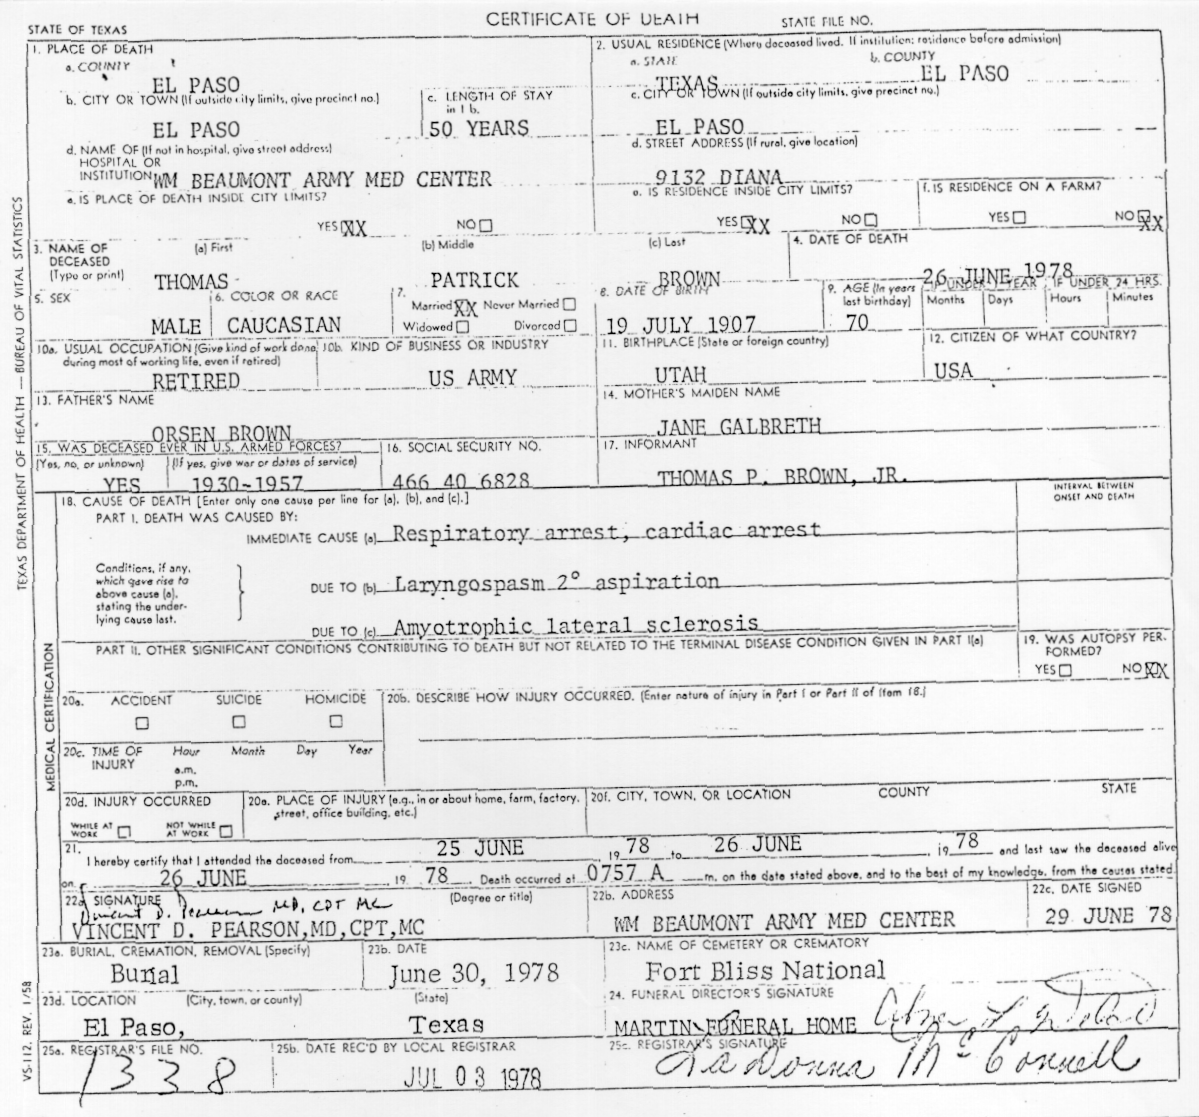 June 26, 1978 Death Certificate for Thomas P. Brown